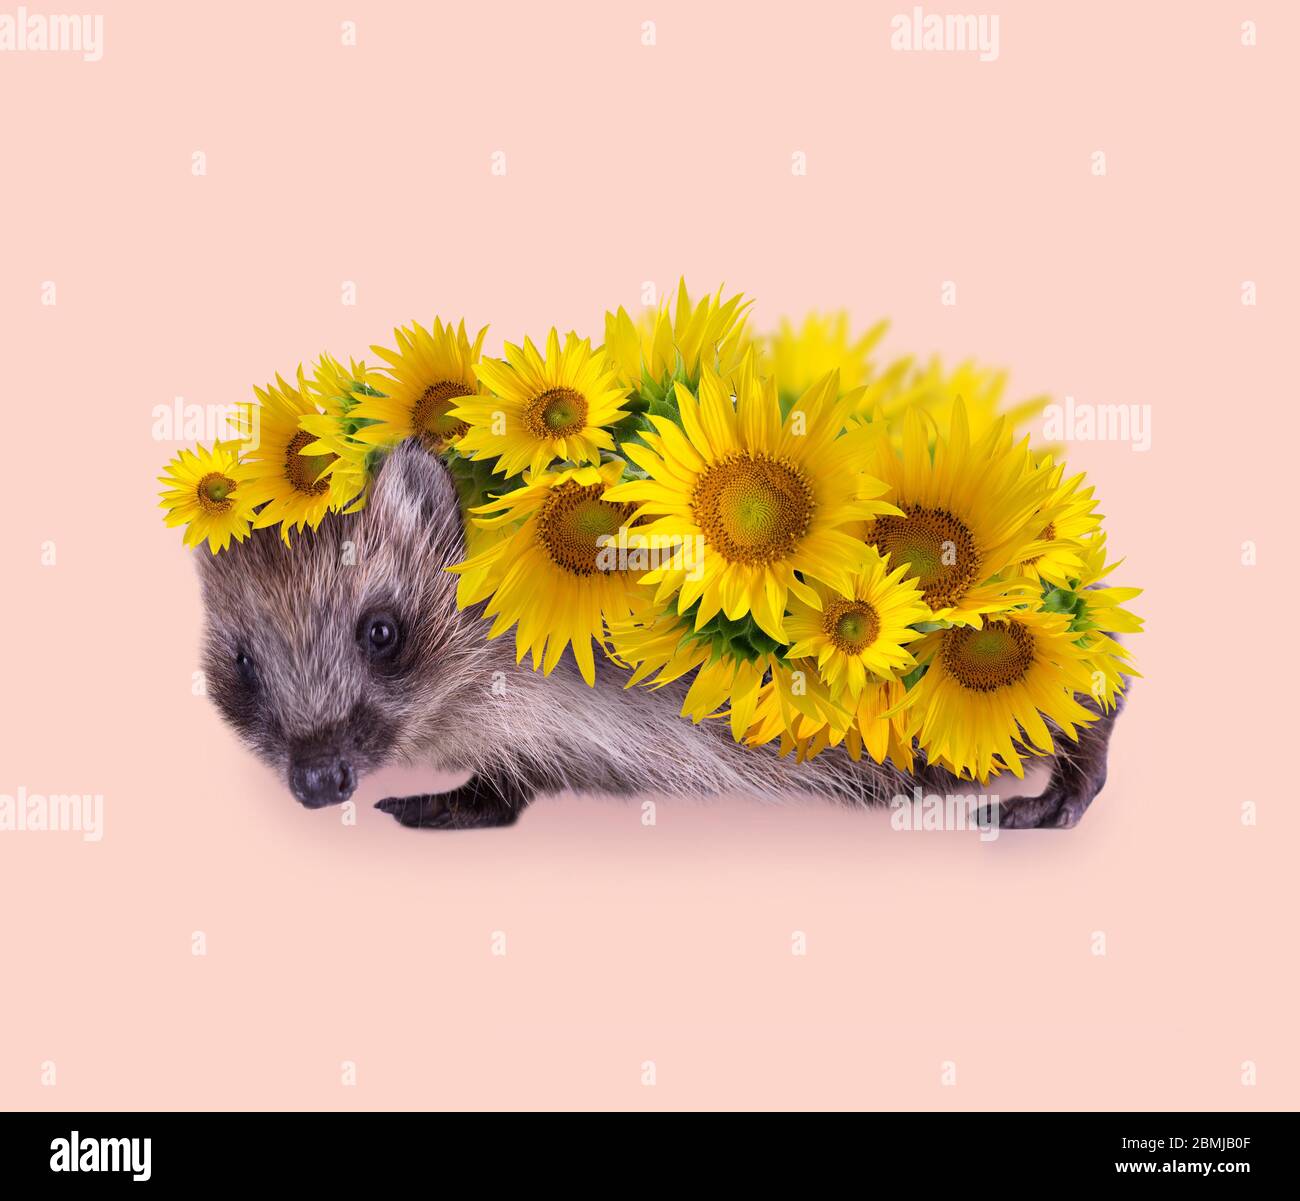 Cute little Hedgehog covered by flowers of bright yellow sunflowers against pastel background. Animal portrait poster. Stock Photo